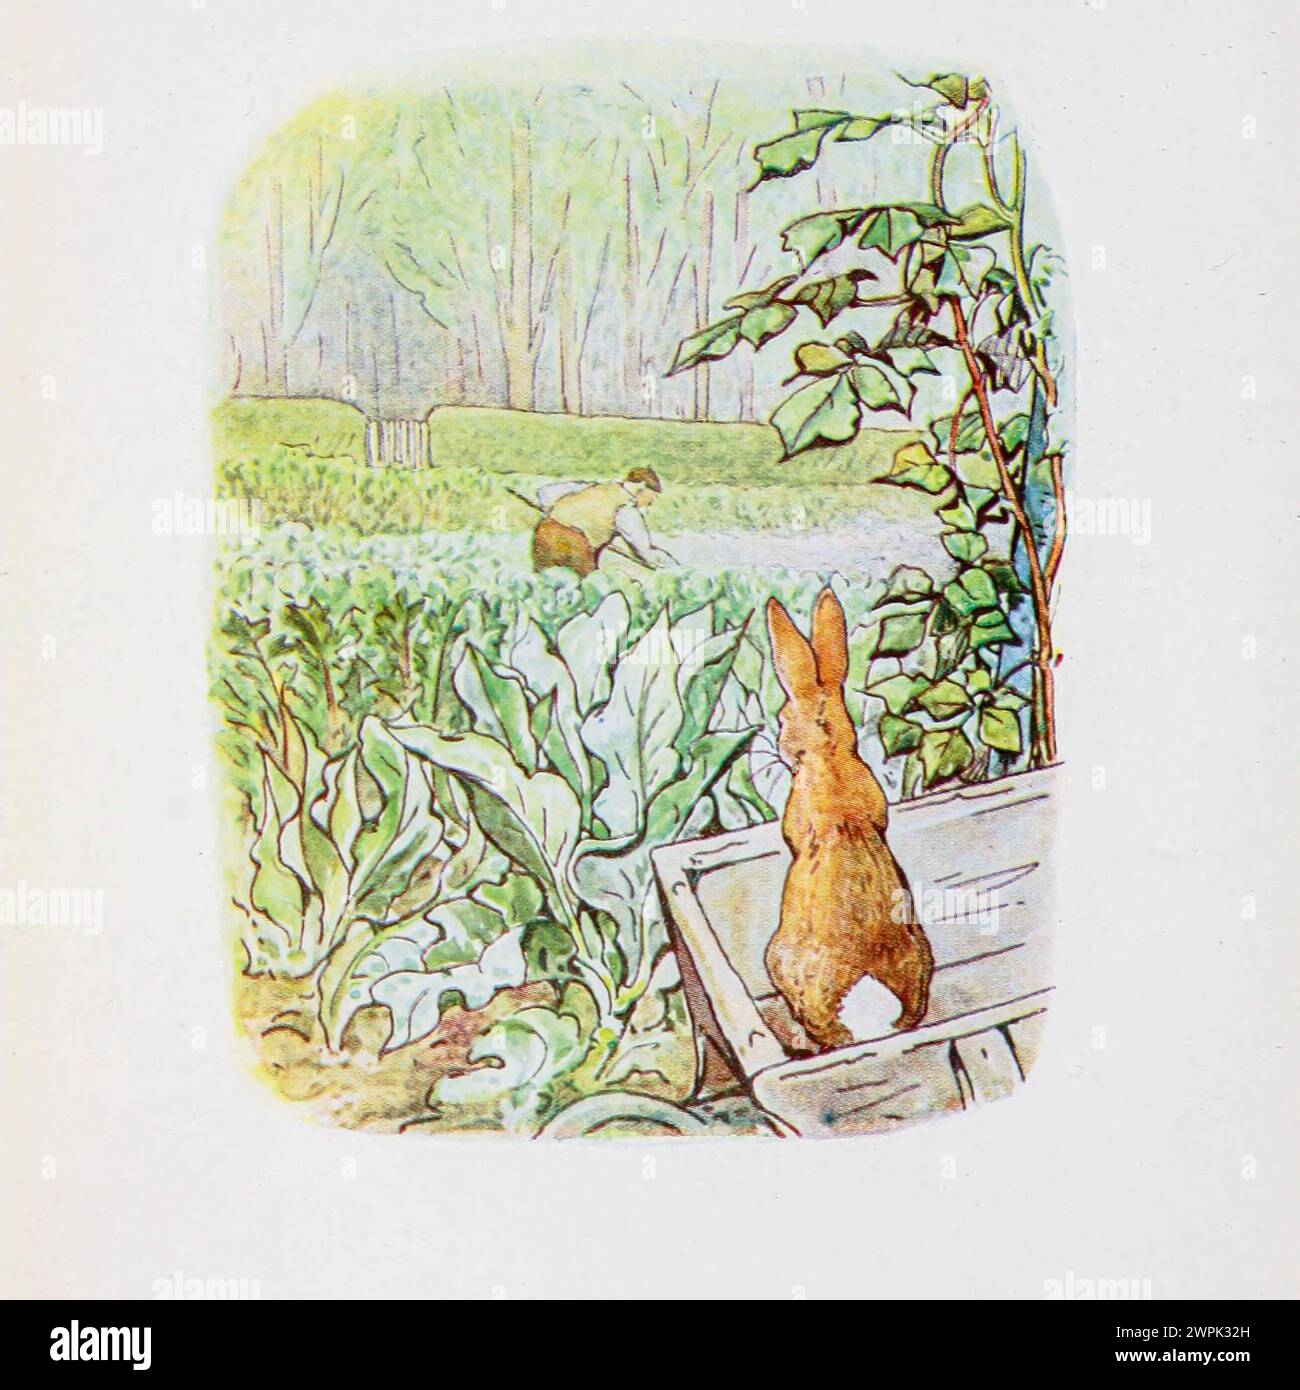 The Tale of Peter Rabbit a children's book written and illustrated by Beatrix Potter that follows mischievous and disobedient young Peter Rabbit as he gets into, and is chased around, the garden of Mr. McGregor. He escapes and returns home to his mother, who puts him to bed after offering him chamomile tea. Stock Photo